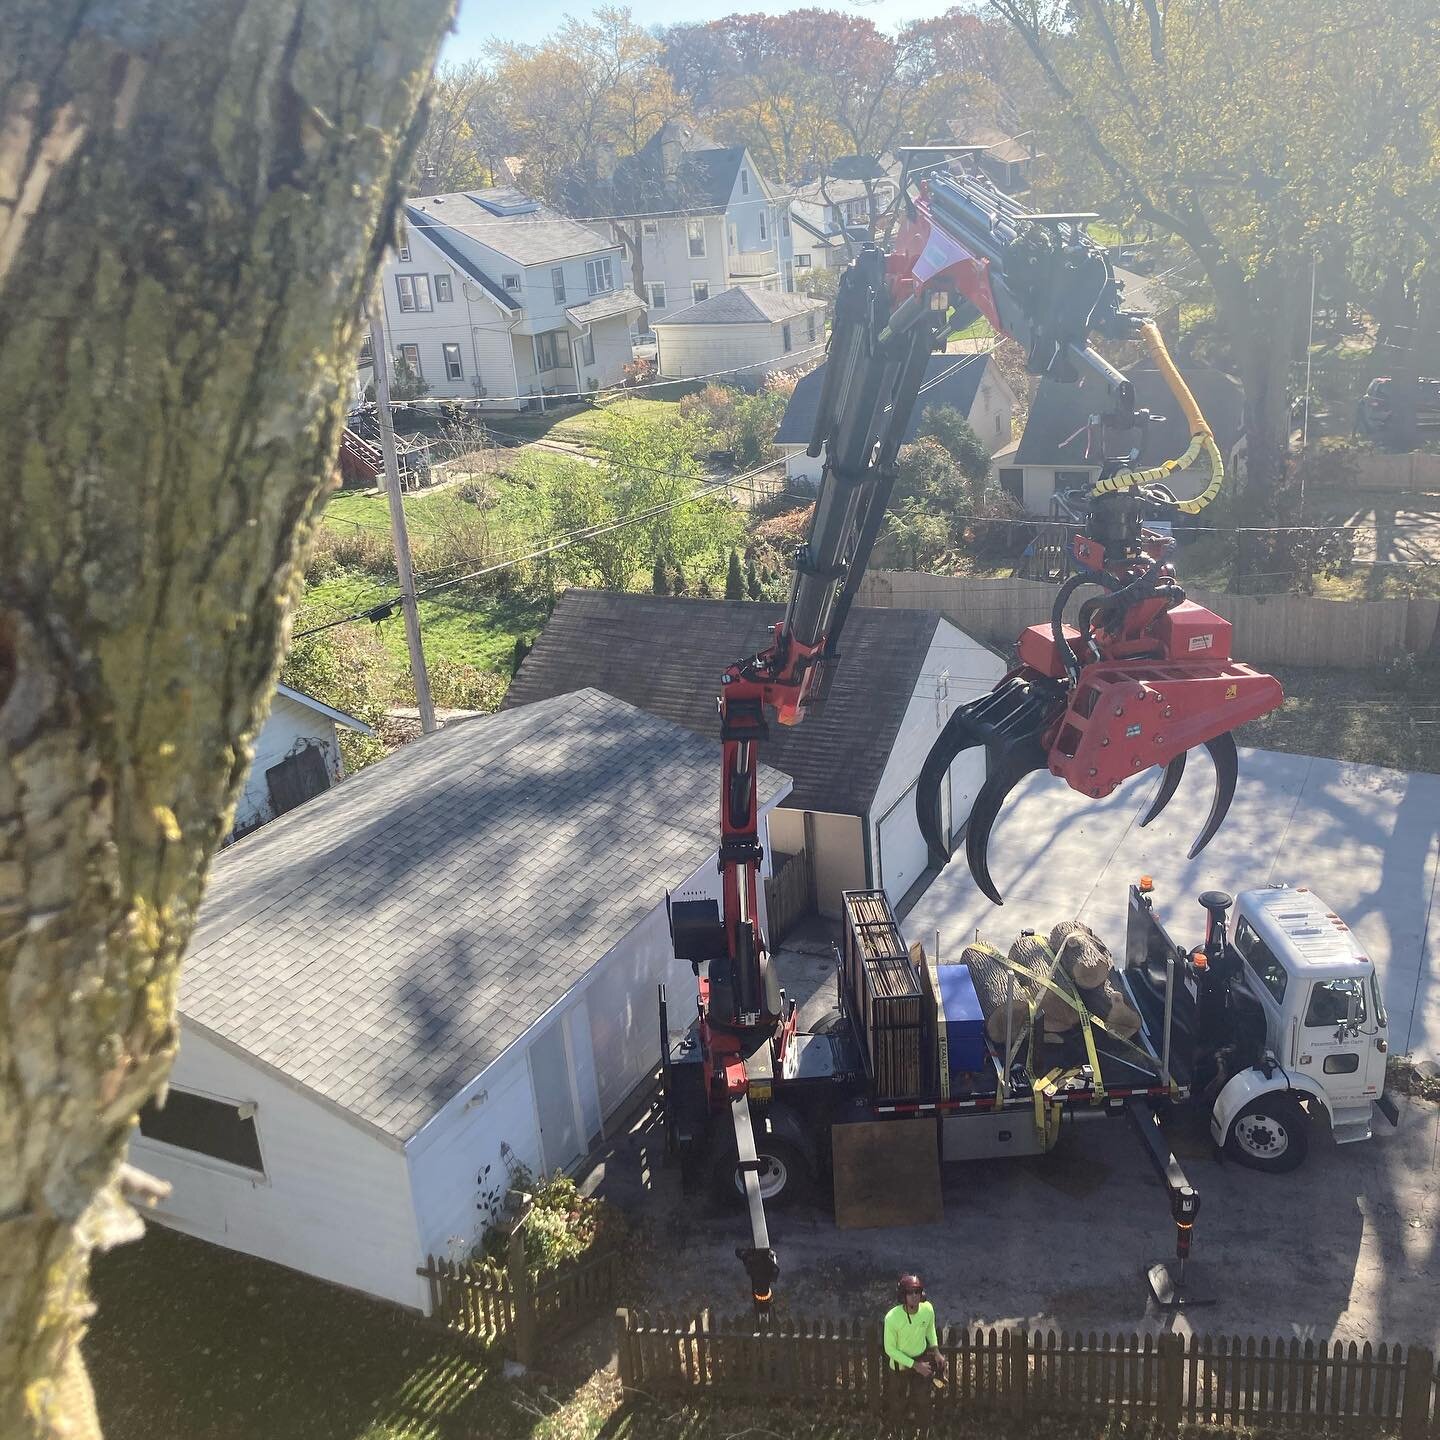 Getting in driveway was the hardest part of the day...#Treemek #arborist #milwaukee